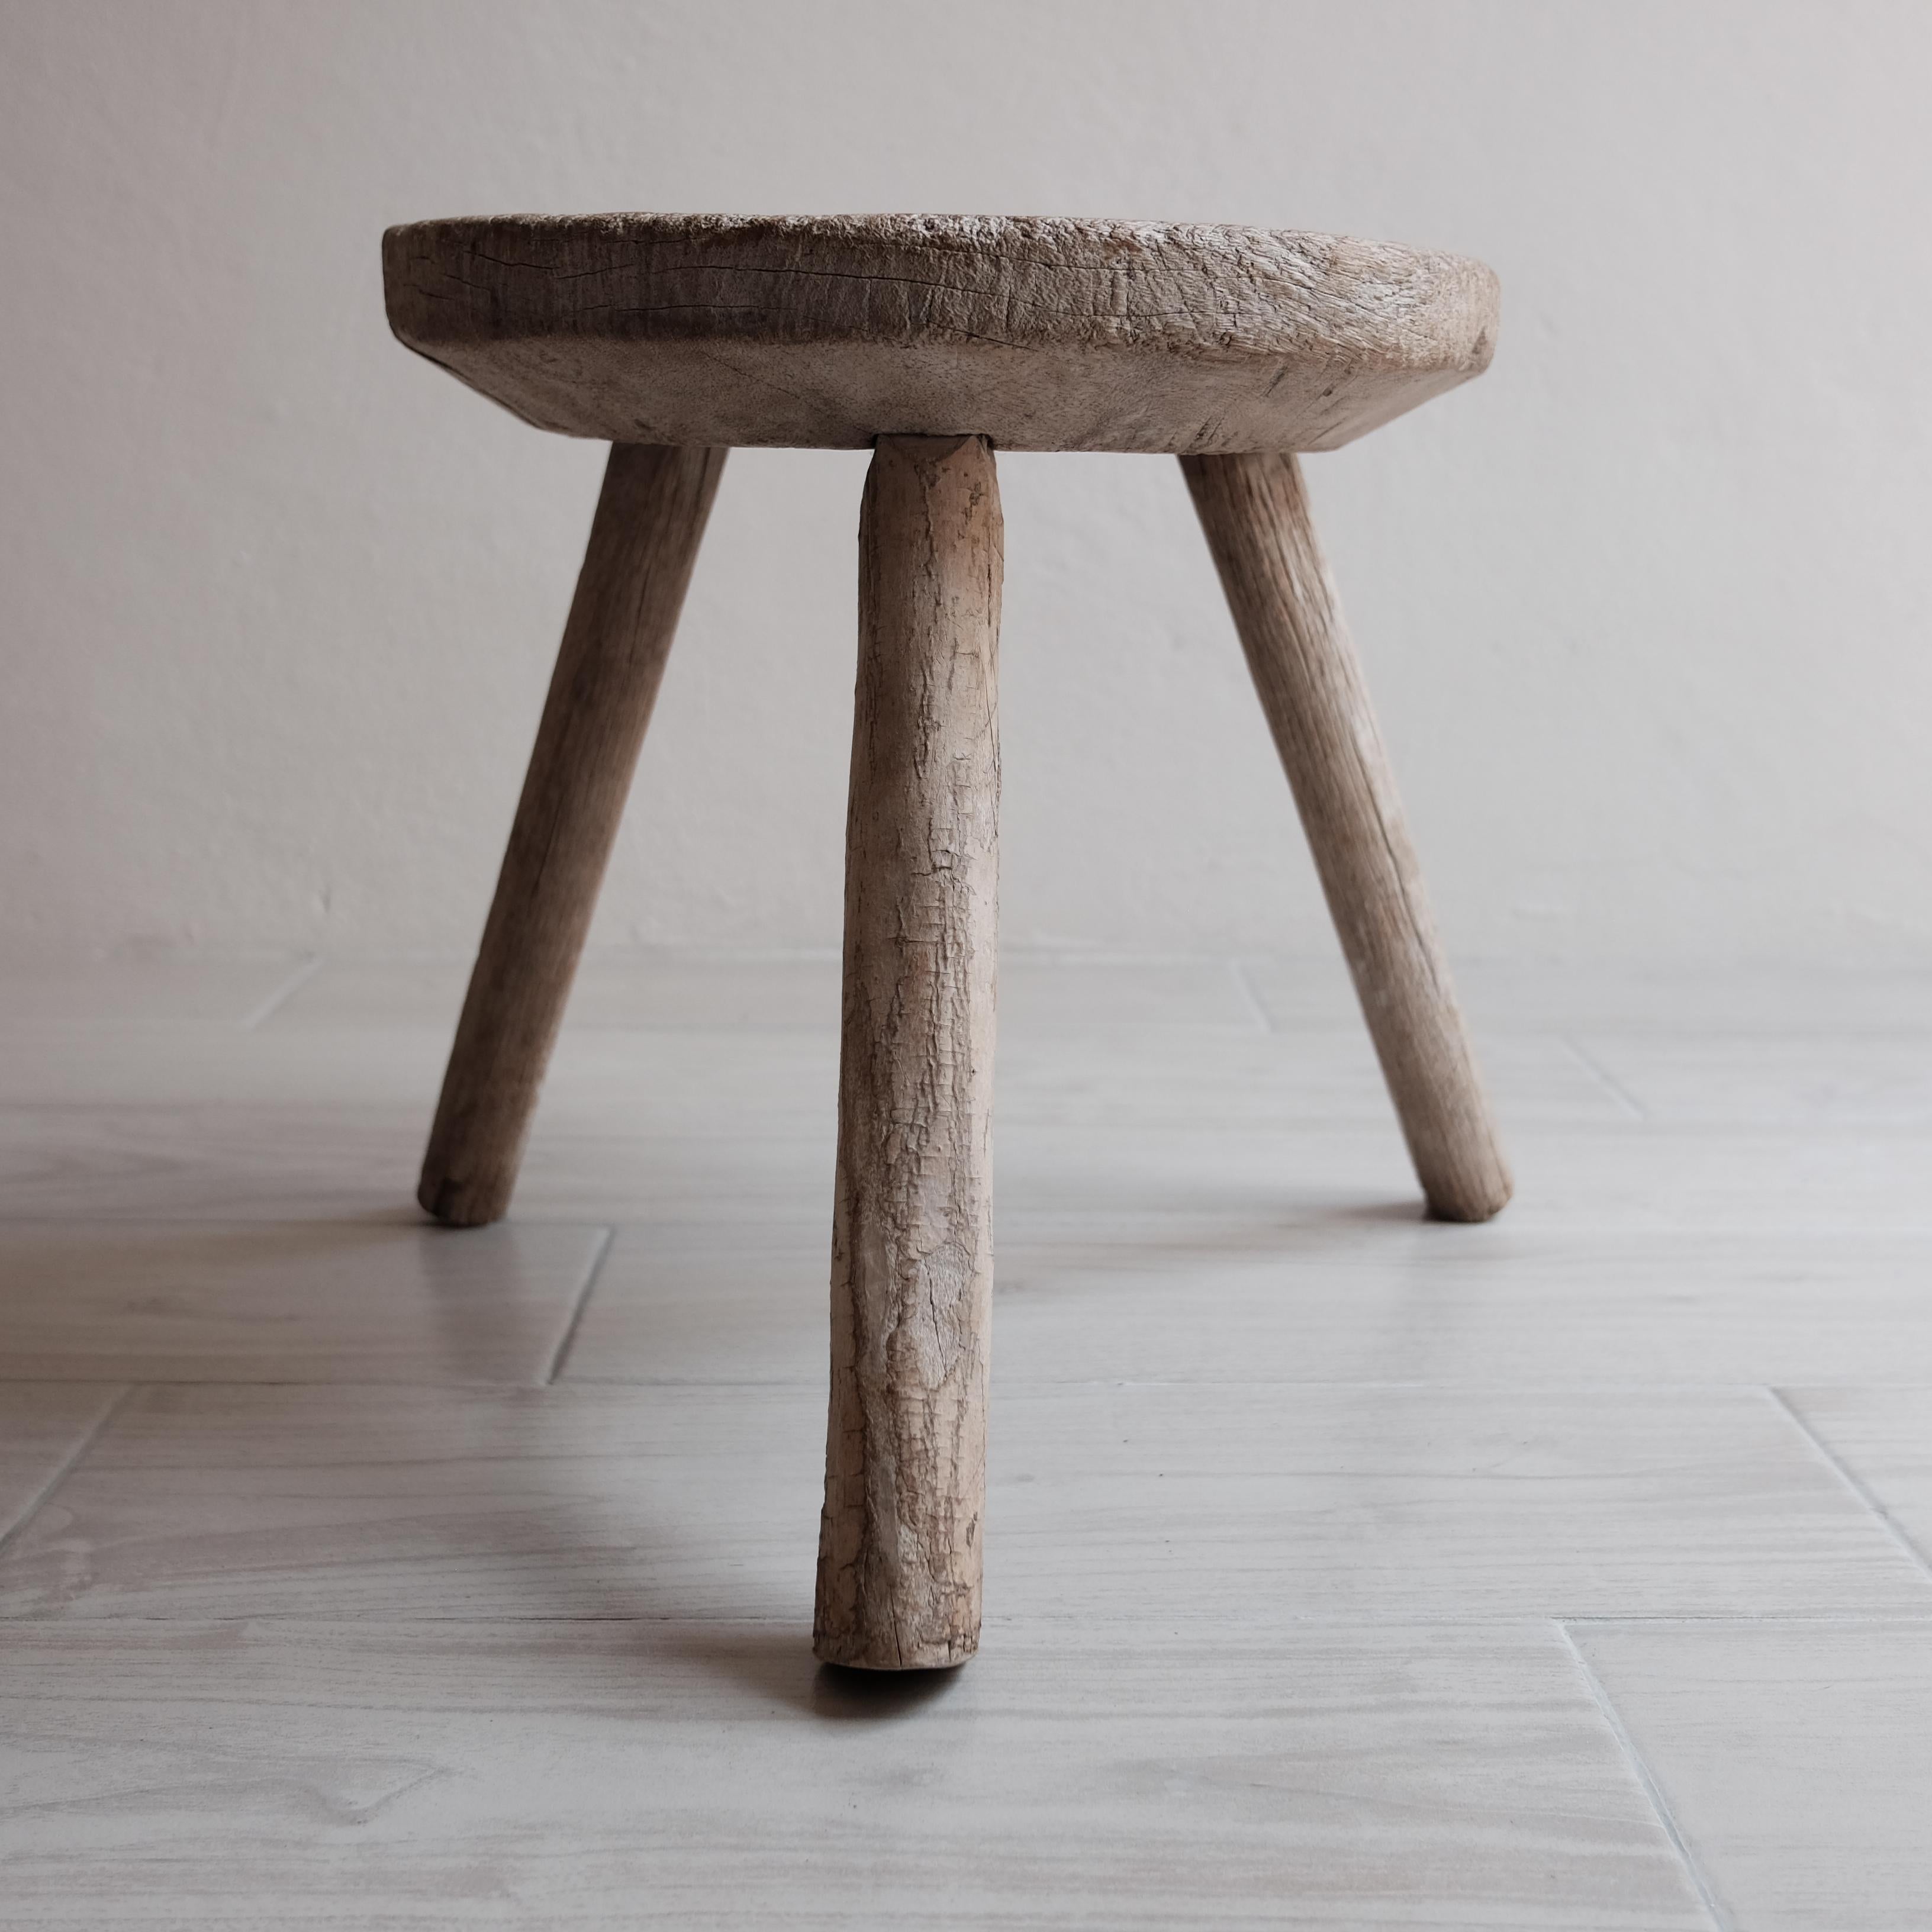 Hardwood Mesquite Stool from Mexico, 1960s